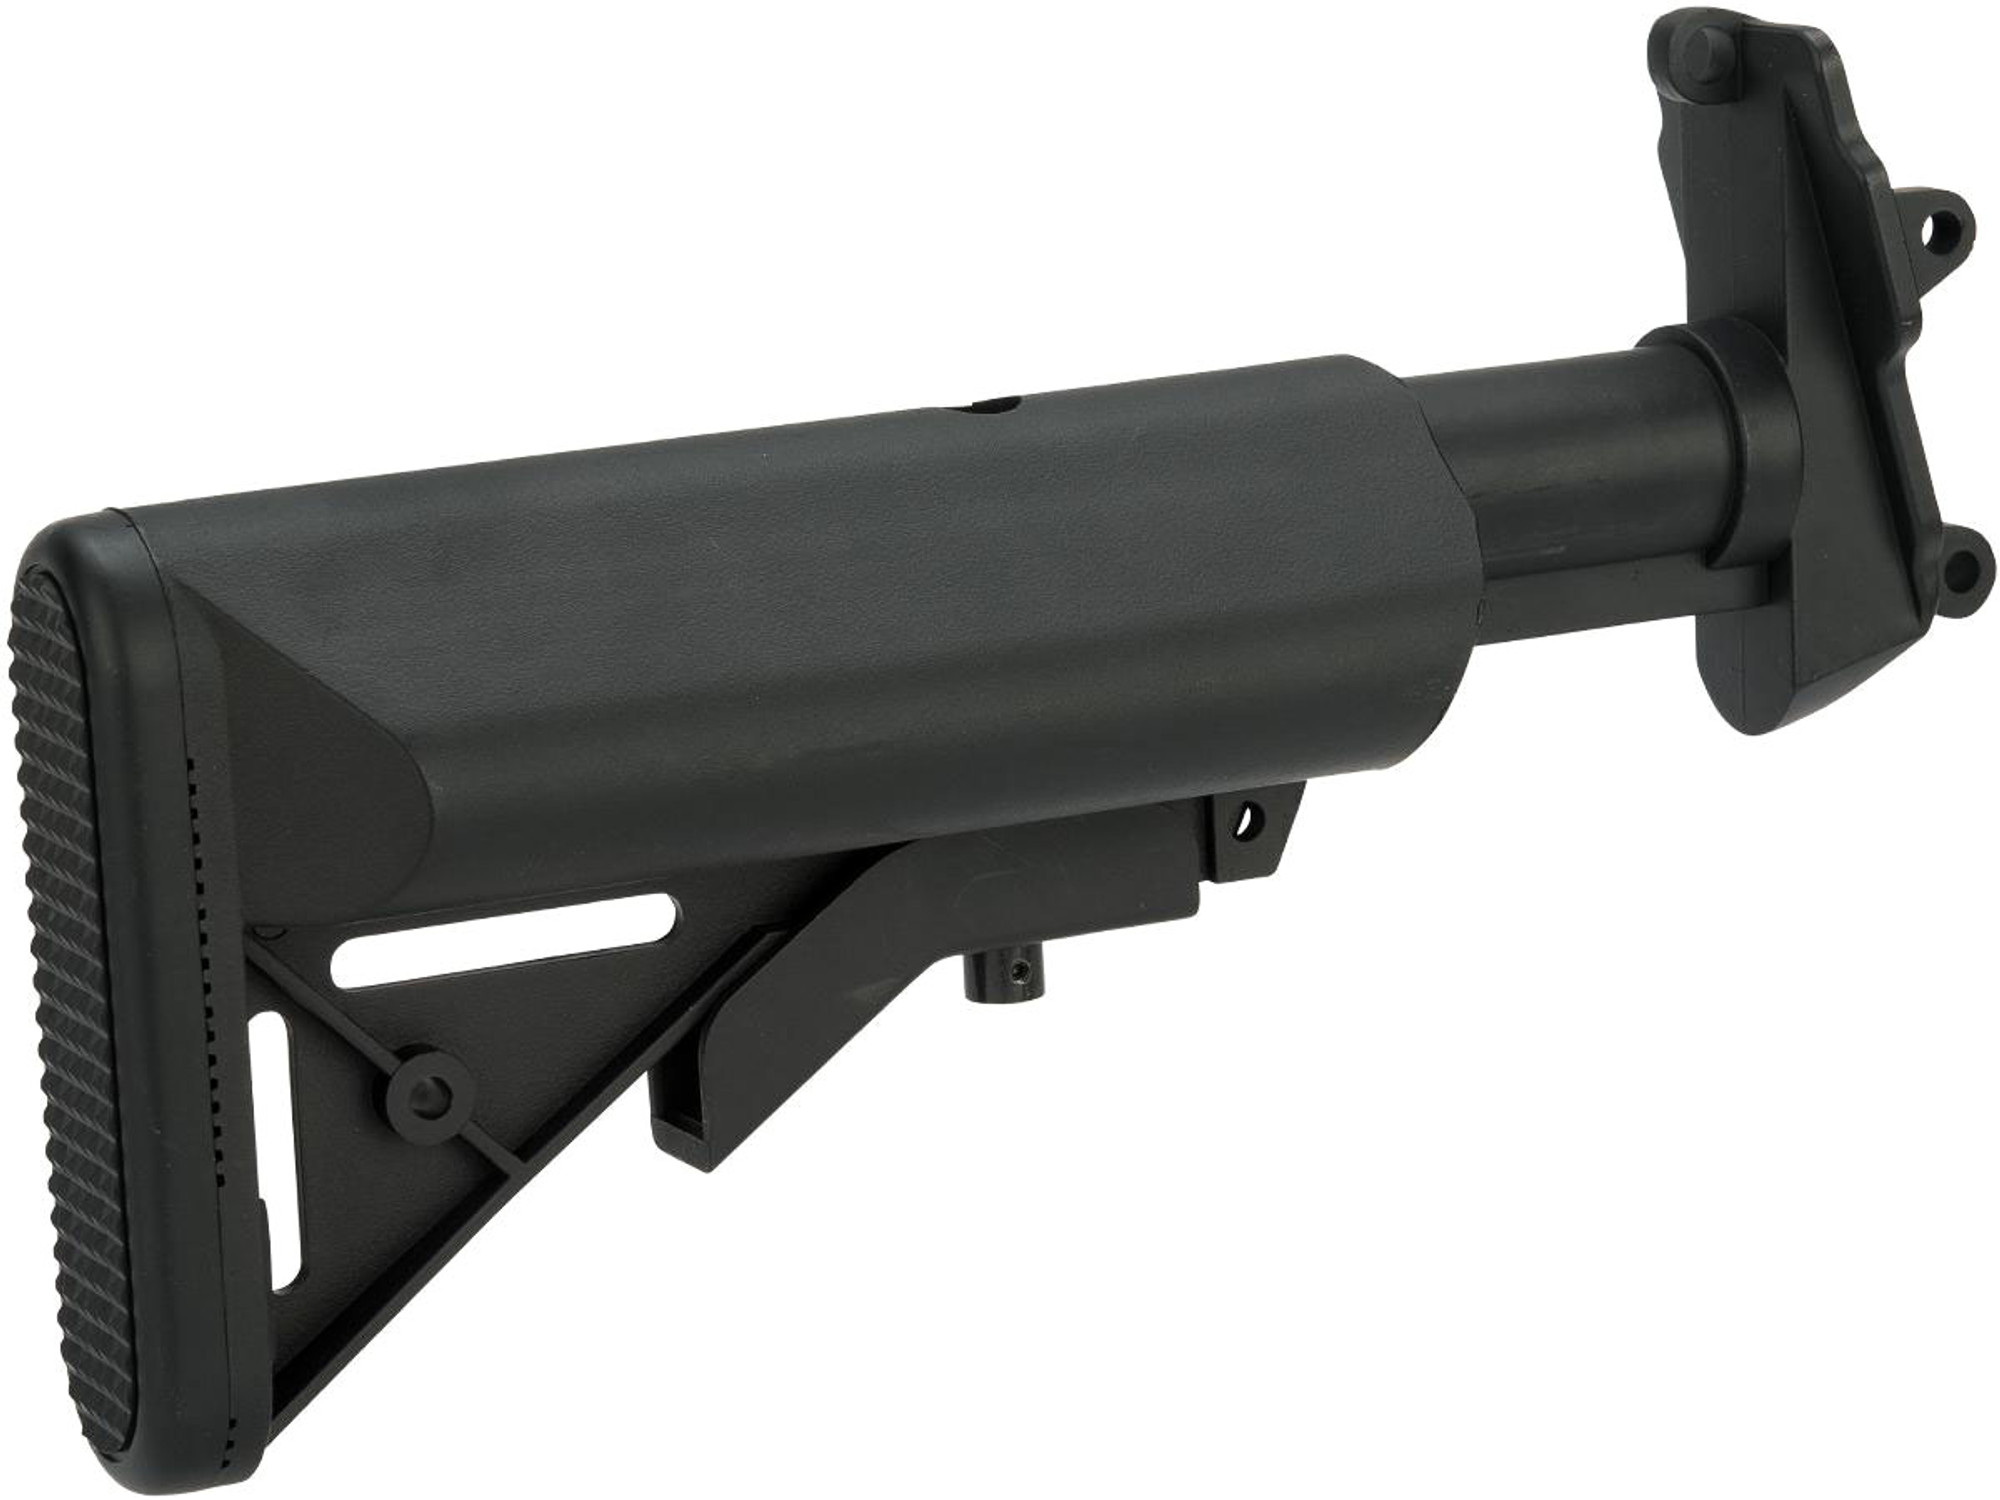 Retractable Ranger Stock System for MK46 Series Airsoft AEG